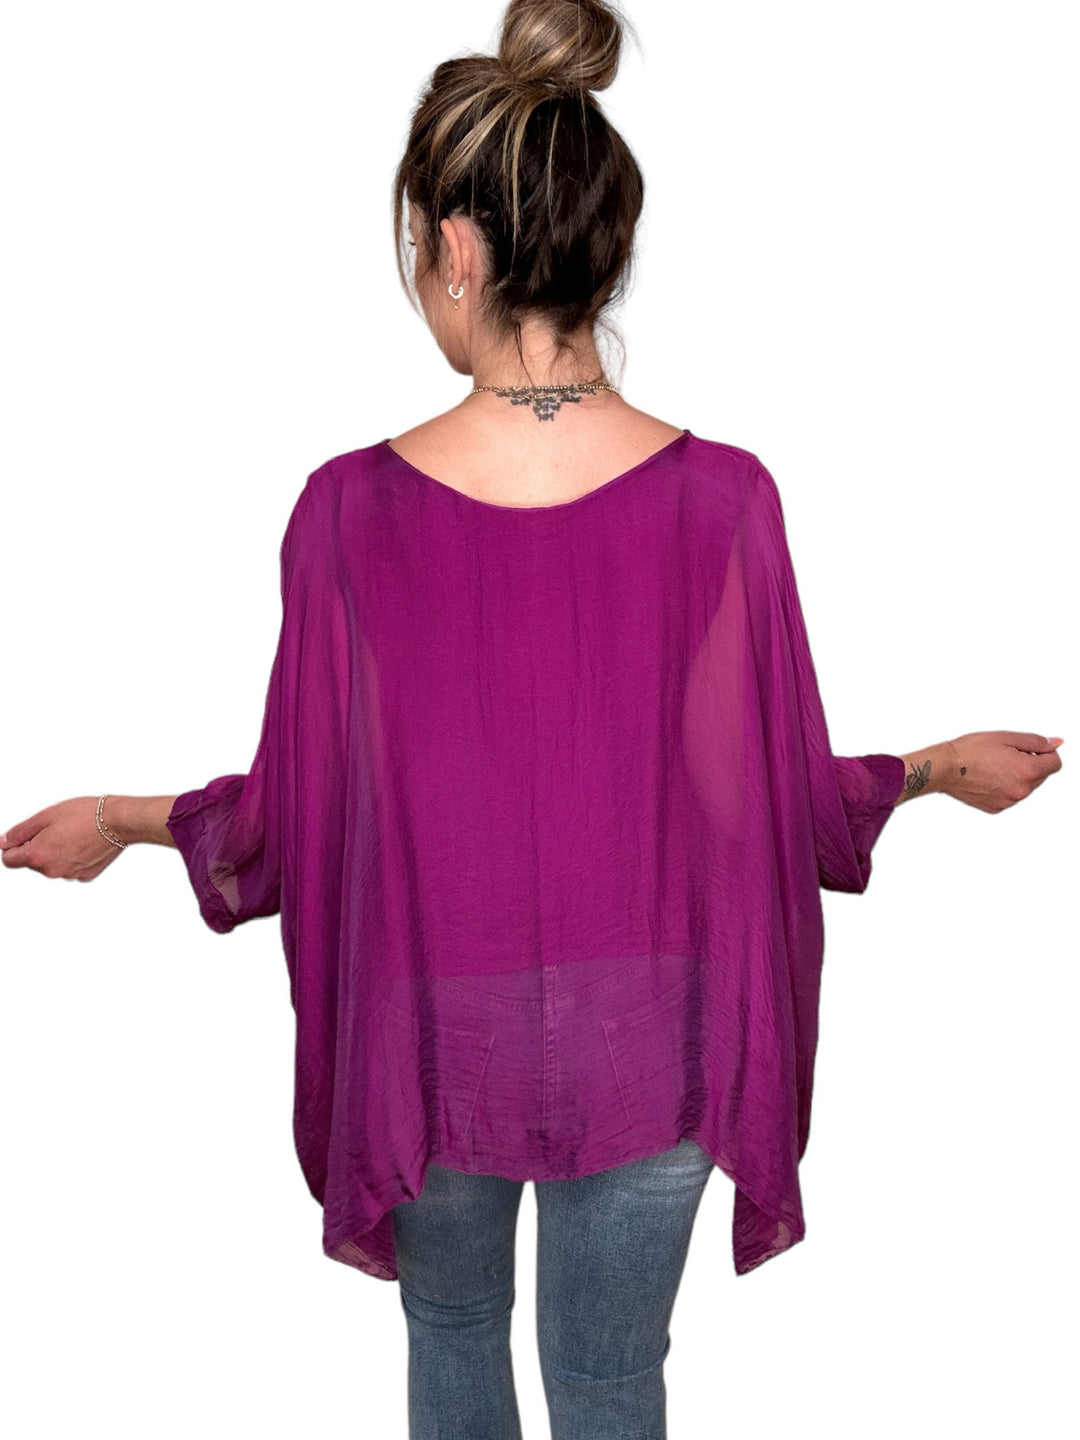 CLASSIC SILK TOP-ORCHID - Kingfisher Road - Online Boutique